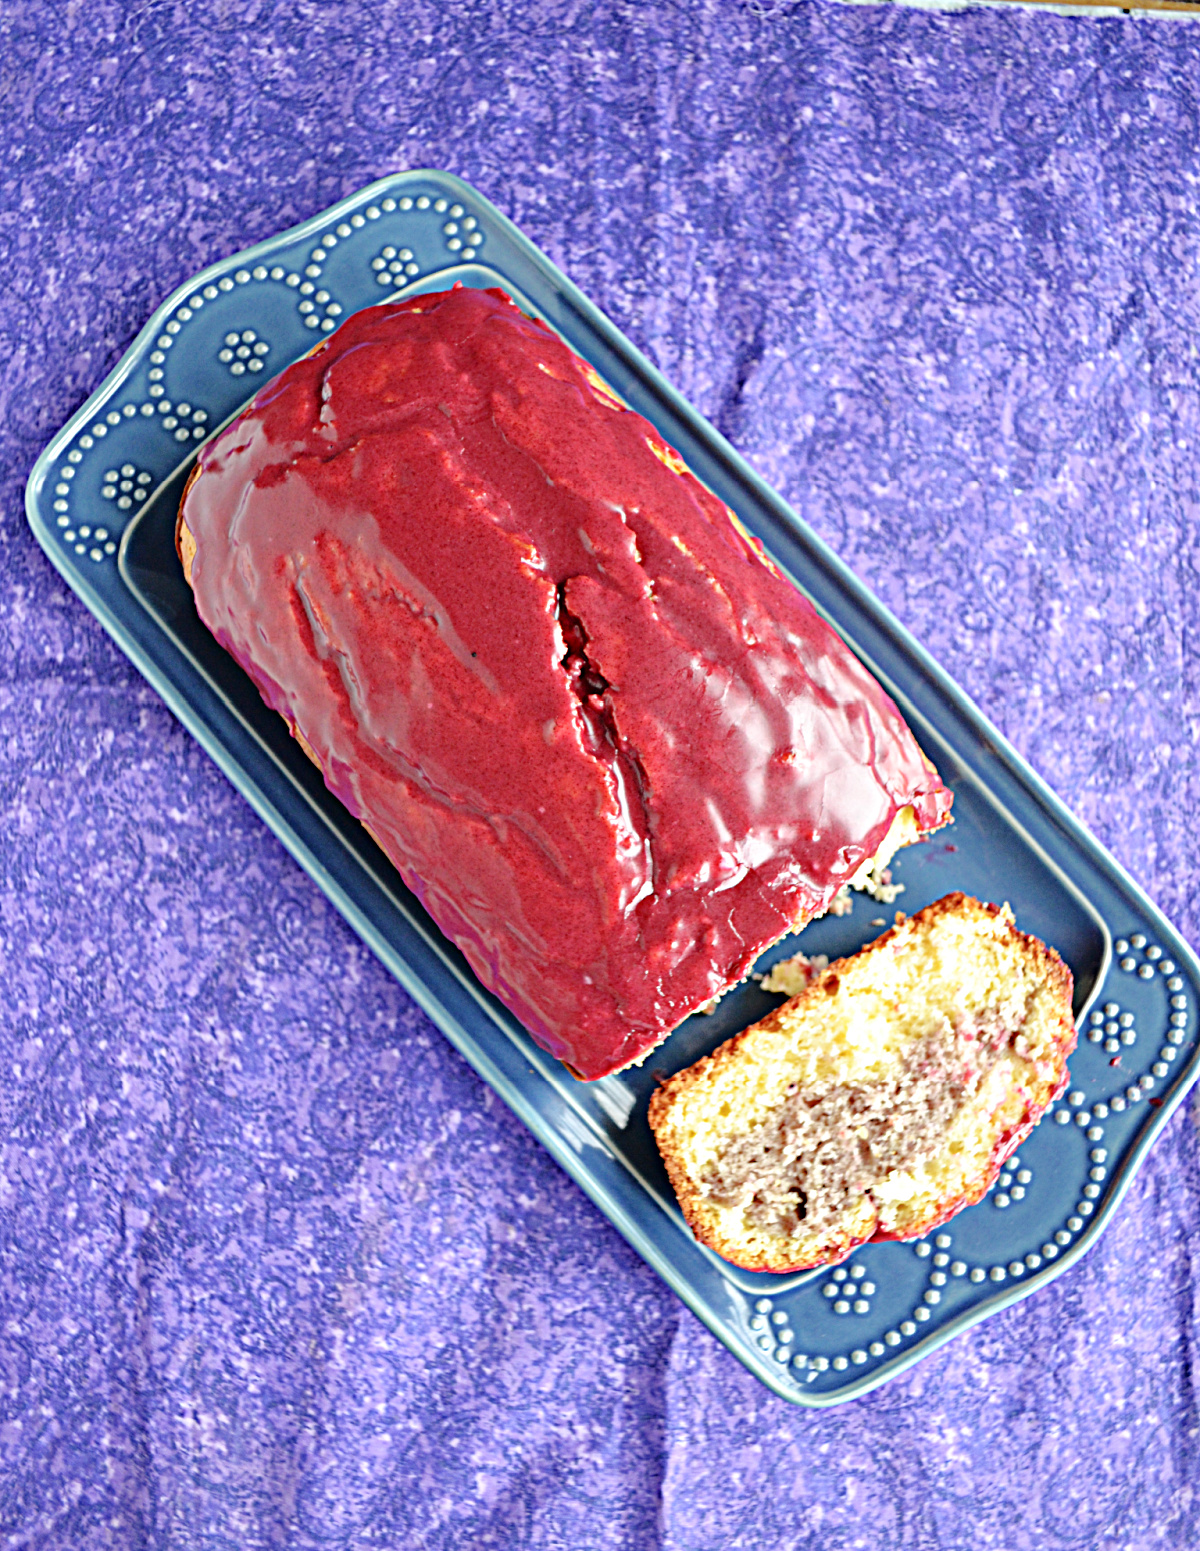 A loaf of HIbiscus cake with deep purple red glaze.